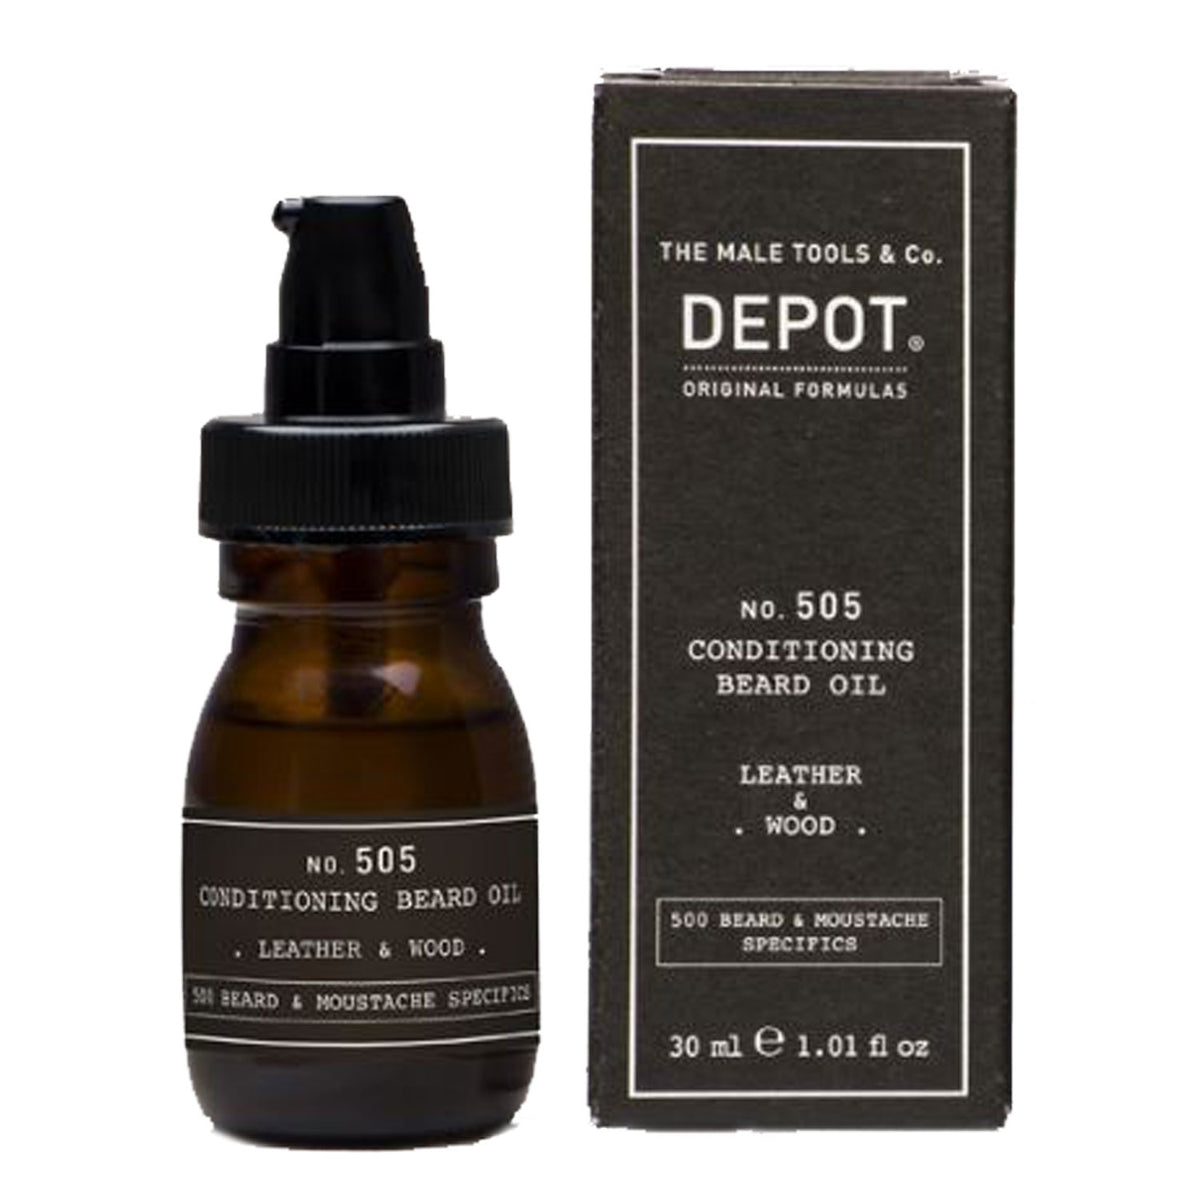 Depot - No.505 Conditioning Beard Oil Leather & Wood 30ml - Orcadia